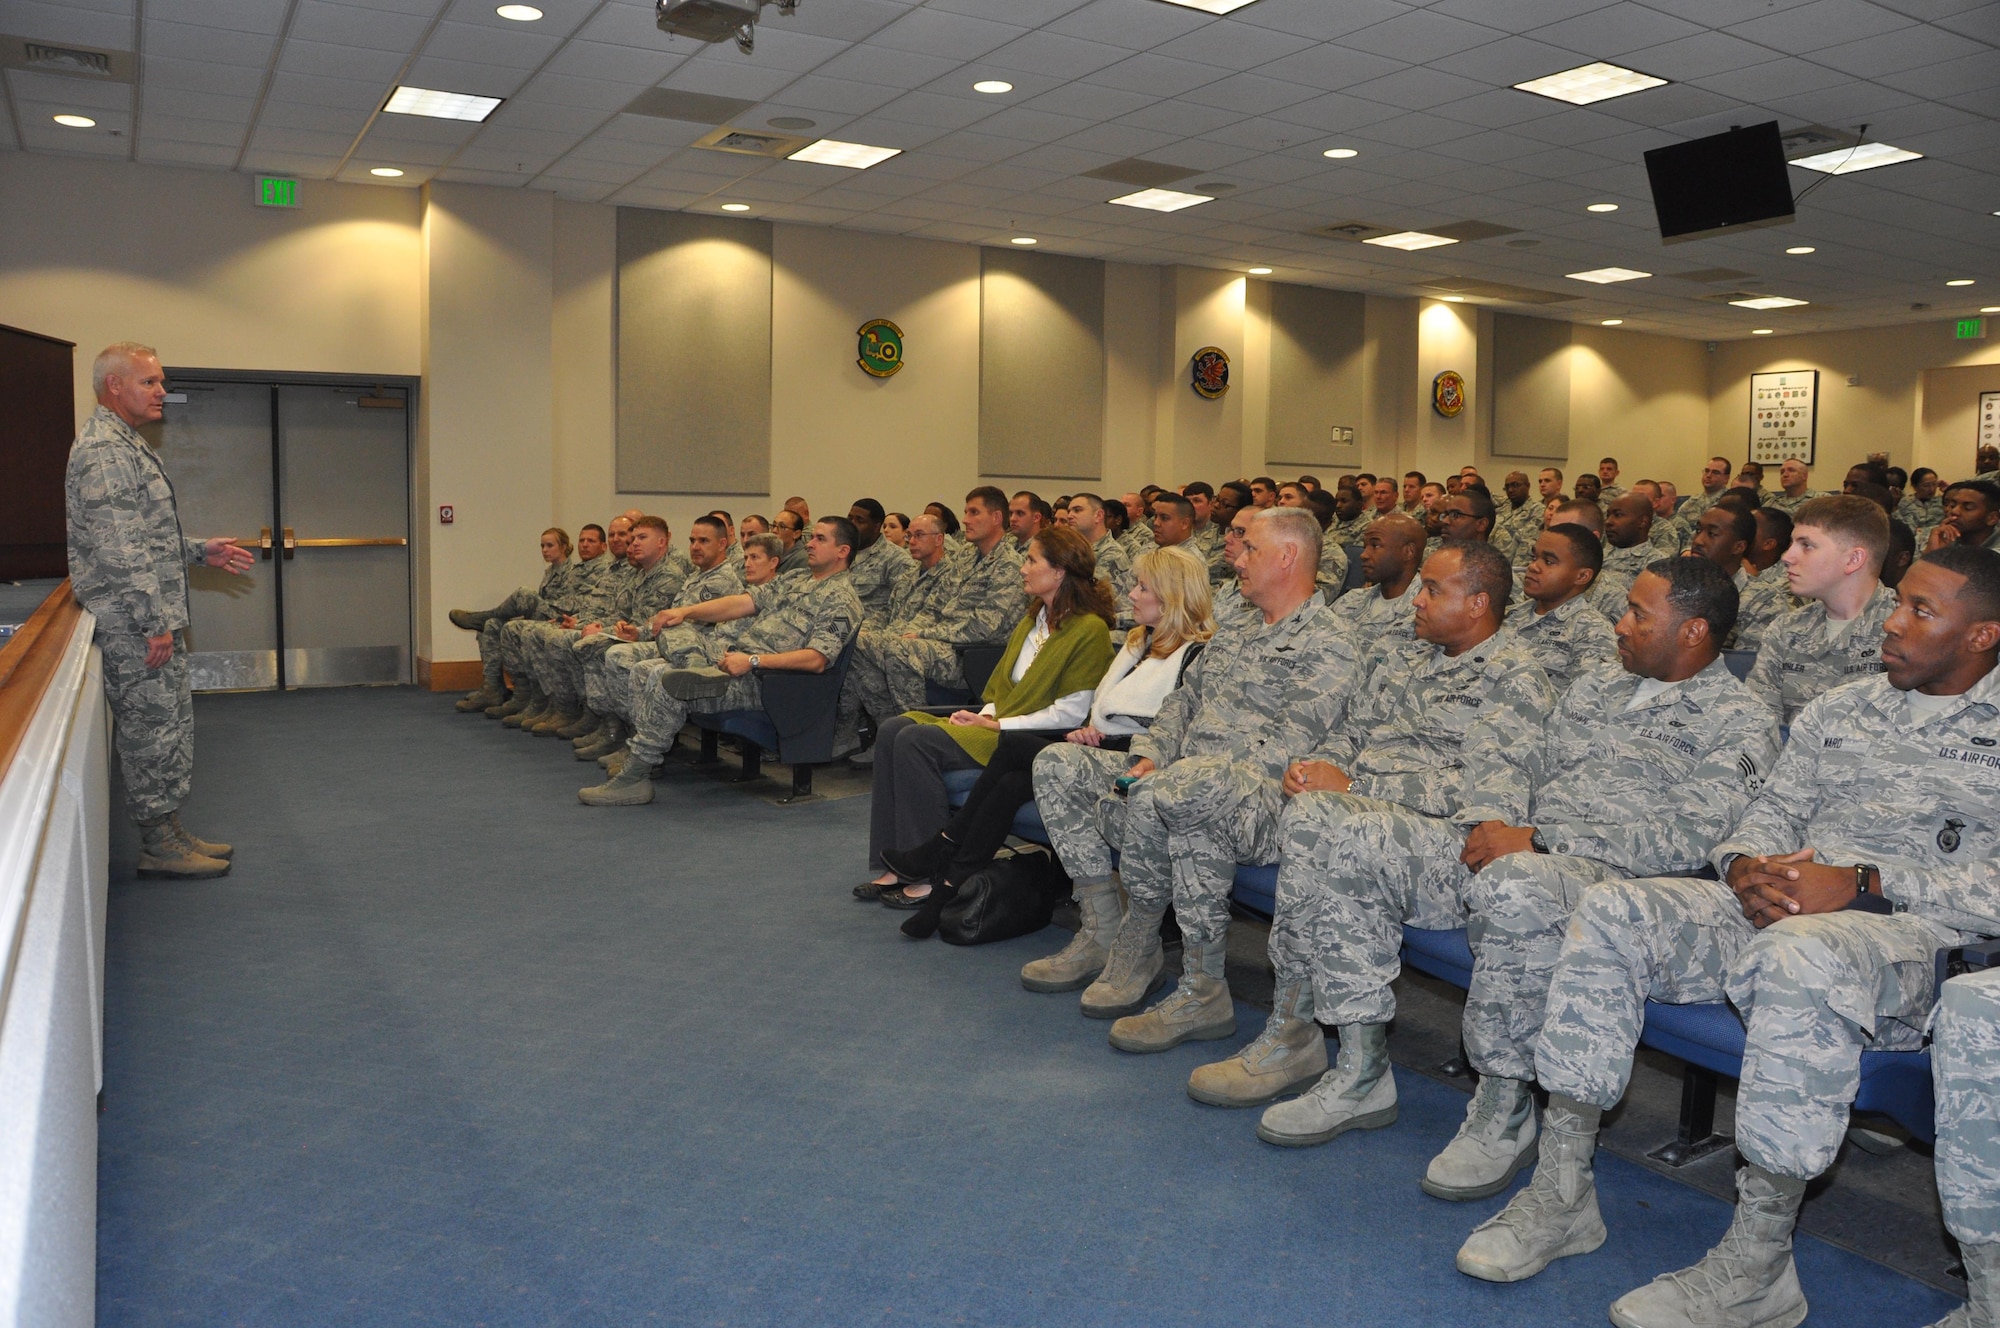 Commanding General of the 22nd Air Force, Maj. Gen. John Stokes, speaks with members of the 908th Airlift Wing that could be deploying soon, Dec. 3 at Maxwell Air Force Base. Stokes wanted to thank the Airmen and ensure they were prepared for their pending mission. (U.S. Air Force photo by Bradley J. Clark)